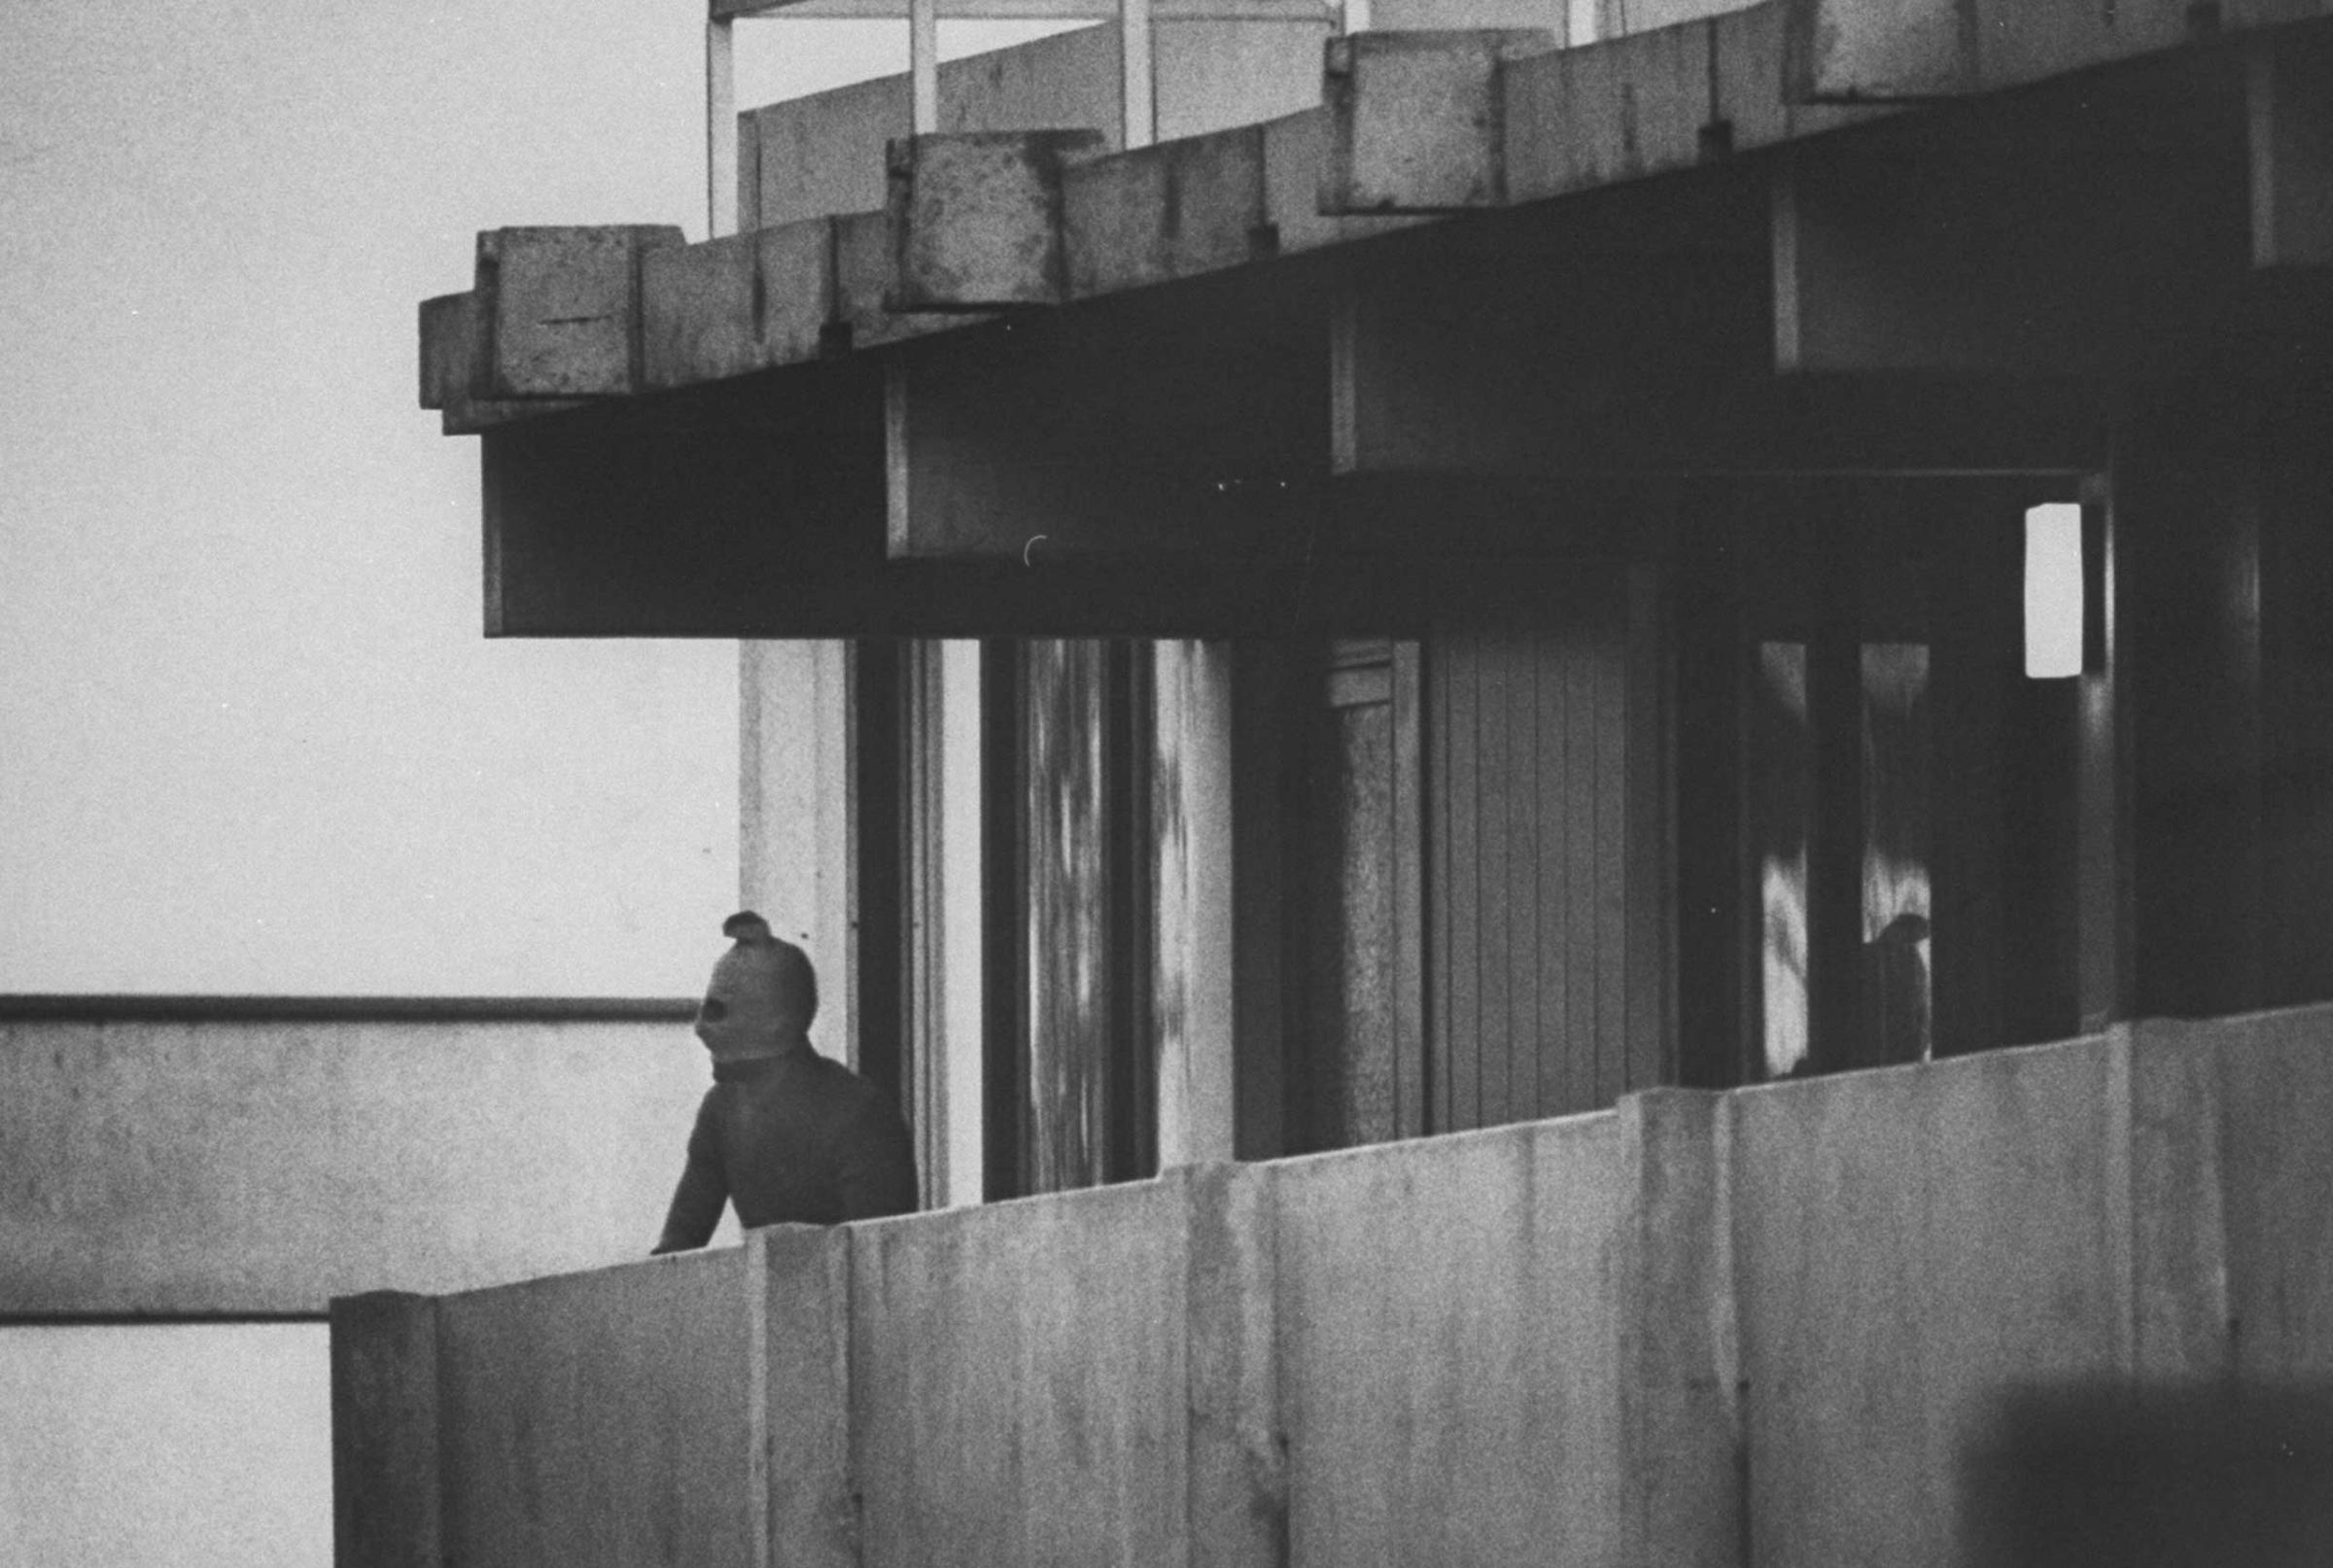 A masked Palestinian terrorist looks out from a balcony of the athletes' housing complex during the Munich Summer Olympics. On September 5, eight Palestinian guerrillas took 11 Israeli athletes and coaches hostage, and subsequently murdered all of them, in what came to be known as the "Munich Massacre" — the most infamous and violent outrage in Olympic history. Originally published in the September 15,1972, issue of LIFE.